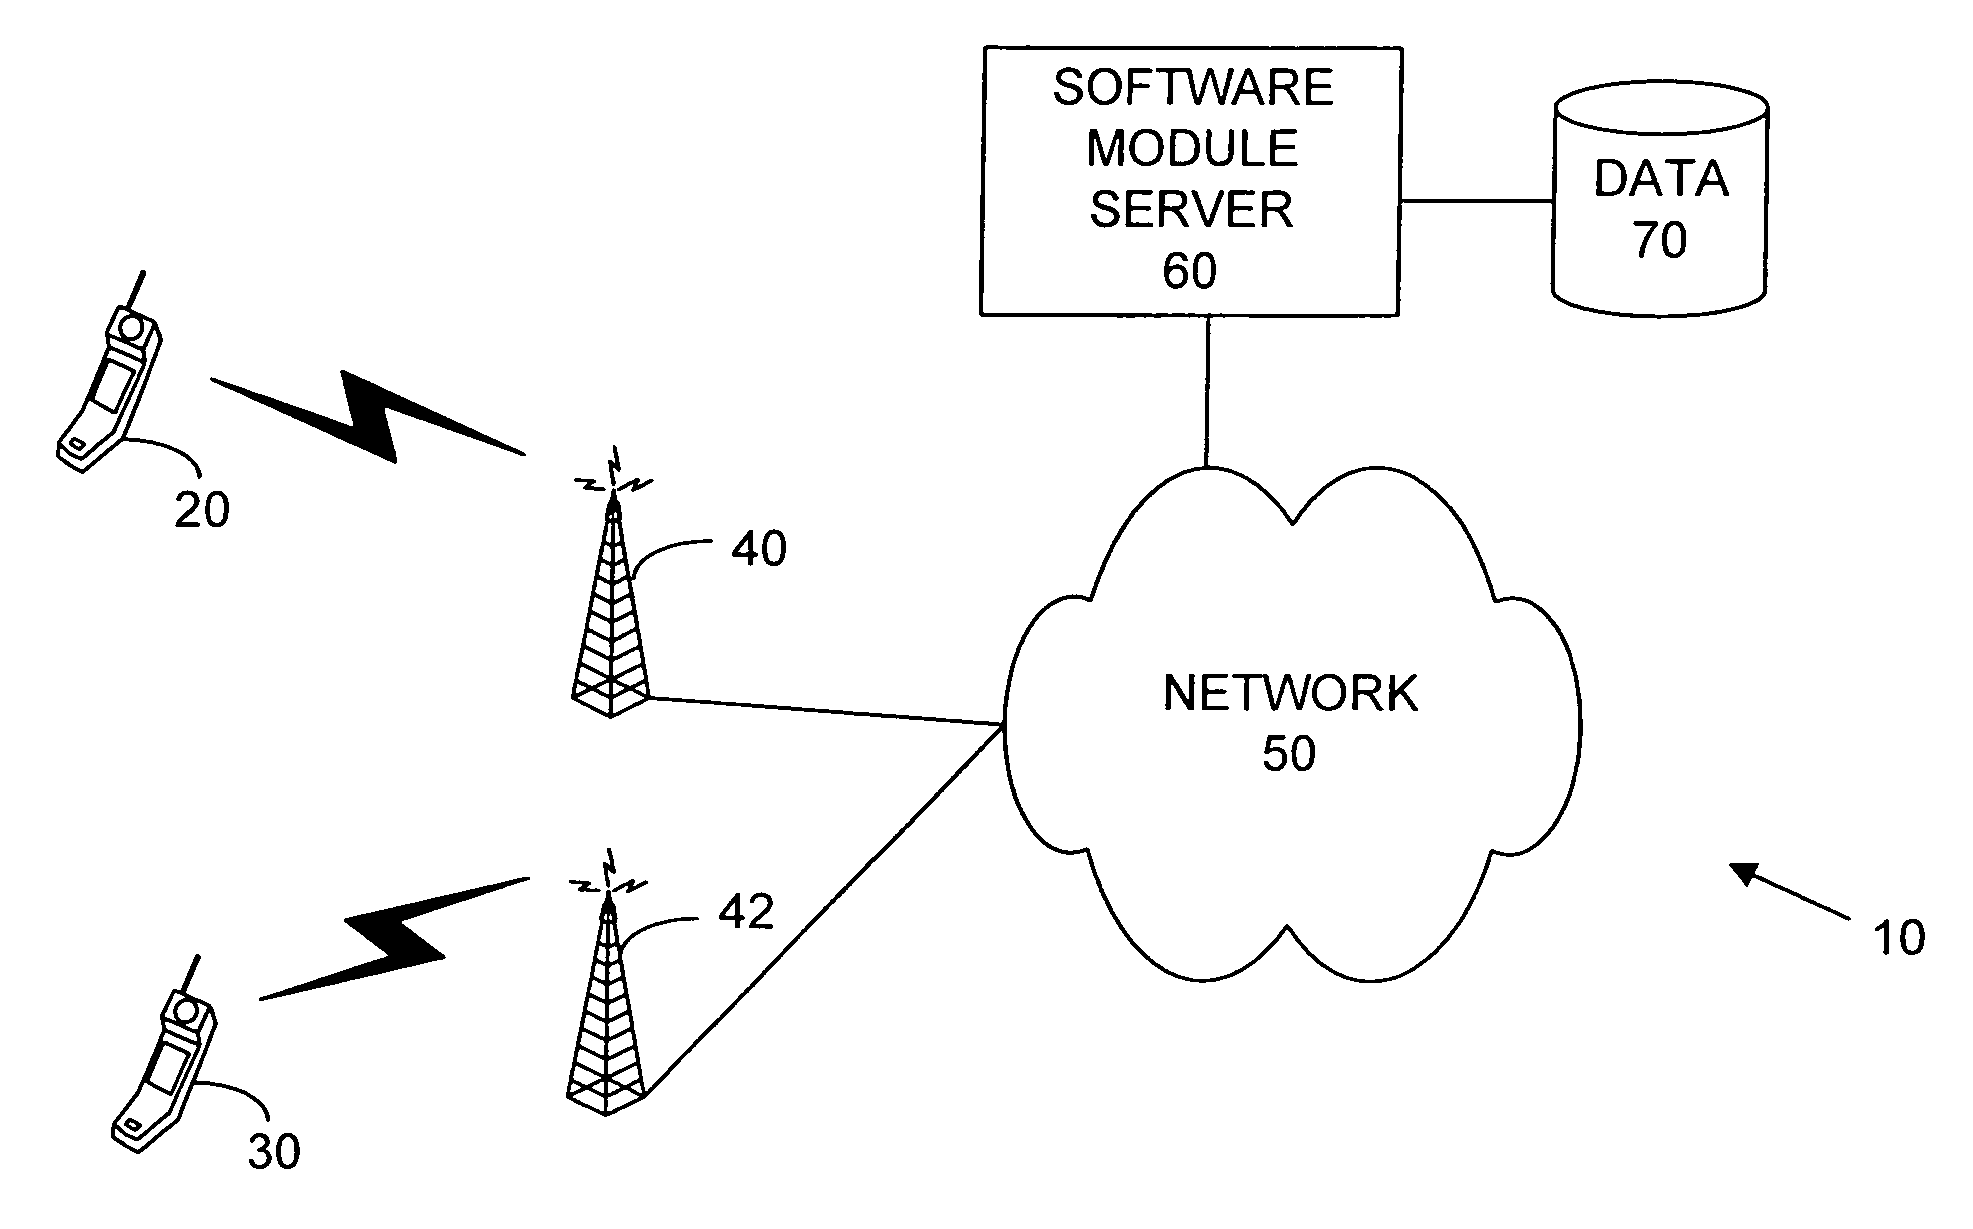 Modular software components for wireless communication devices